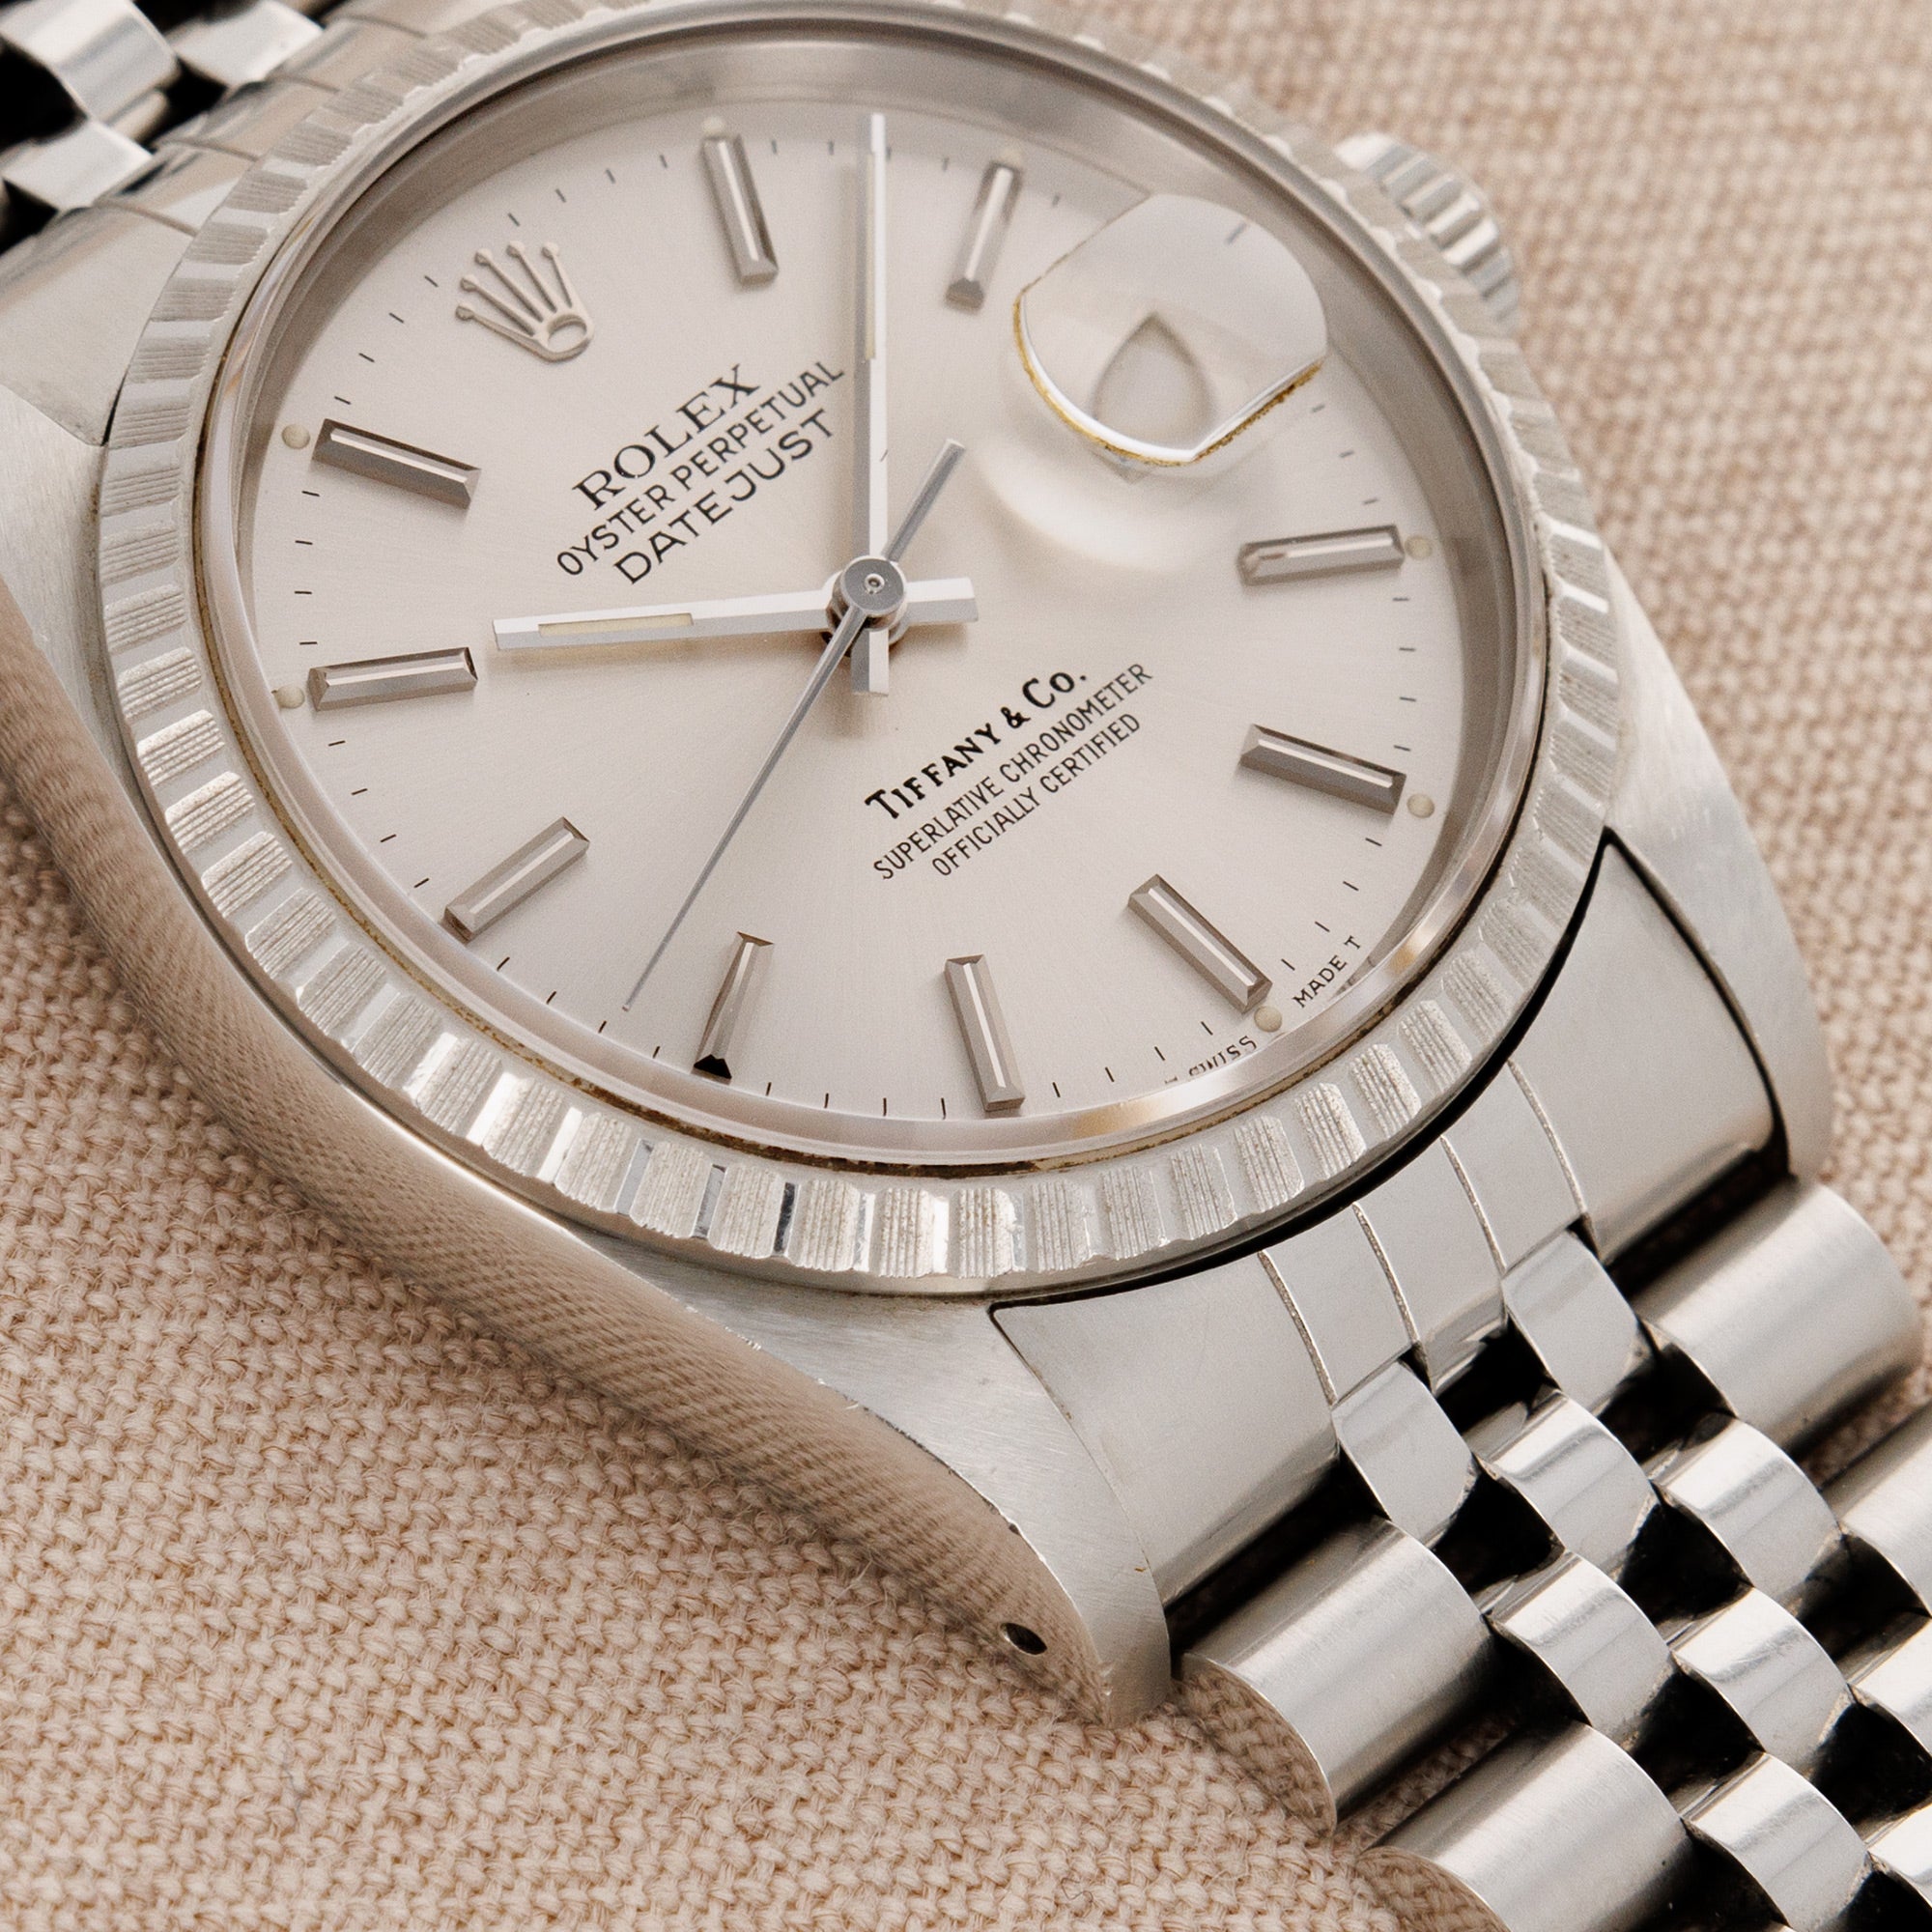 Rolex - Rolex Steel Datejust Ref. 16220 Retailed by Tiffany &amp; Co. - The Keystone Watches